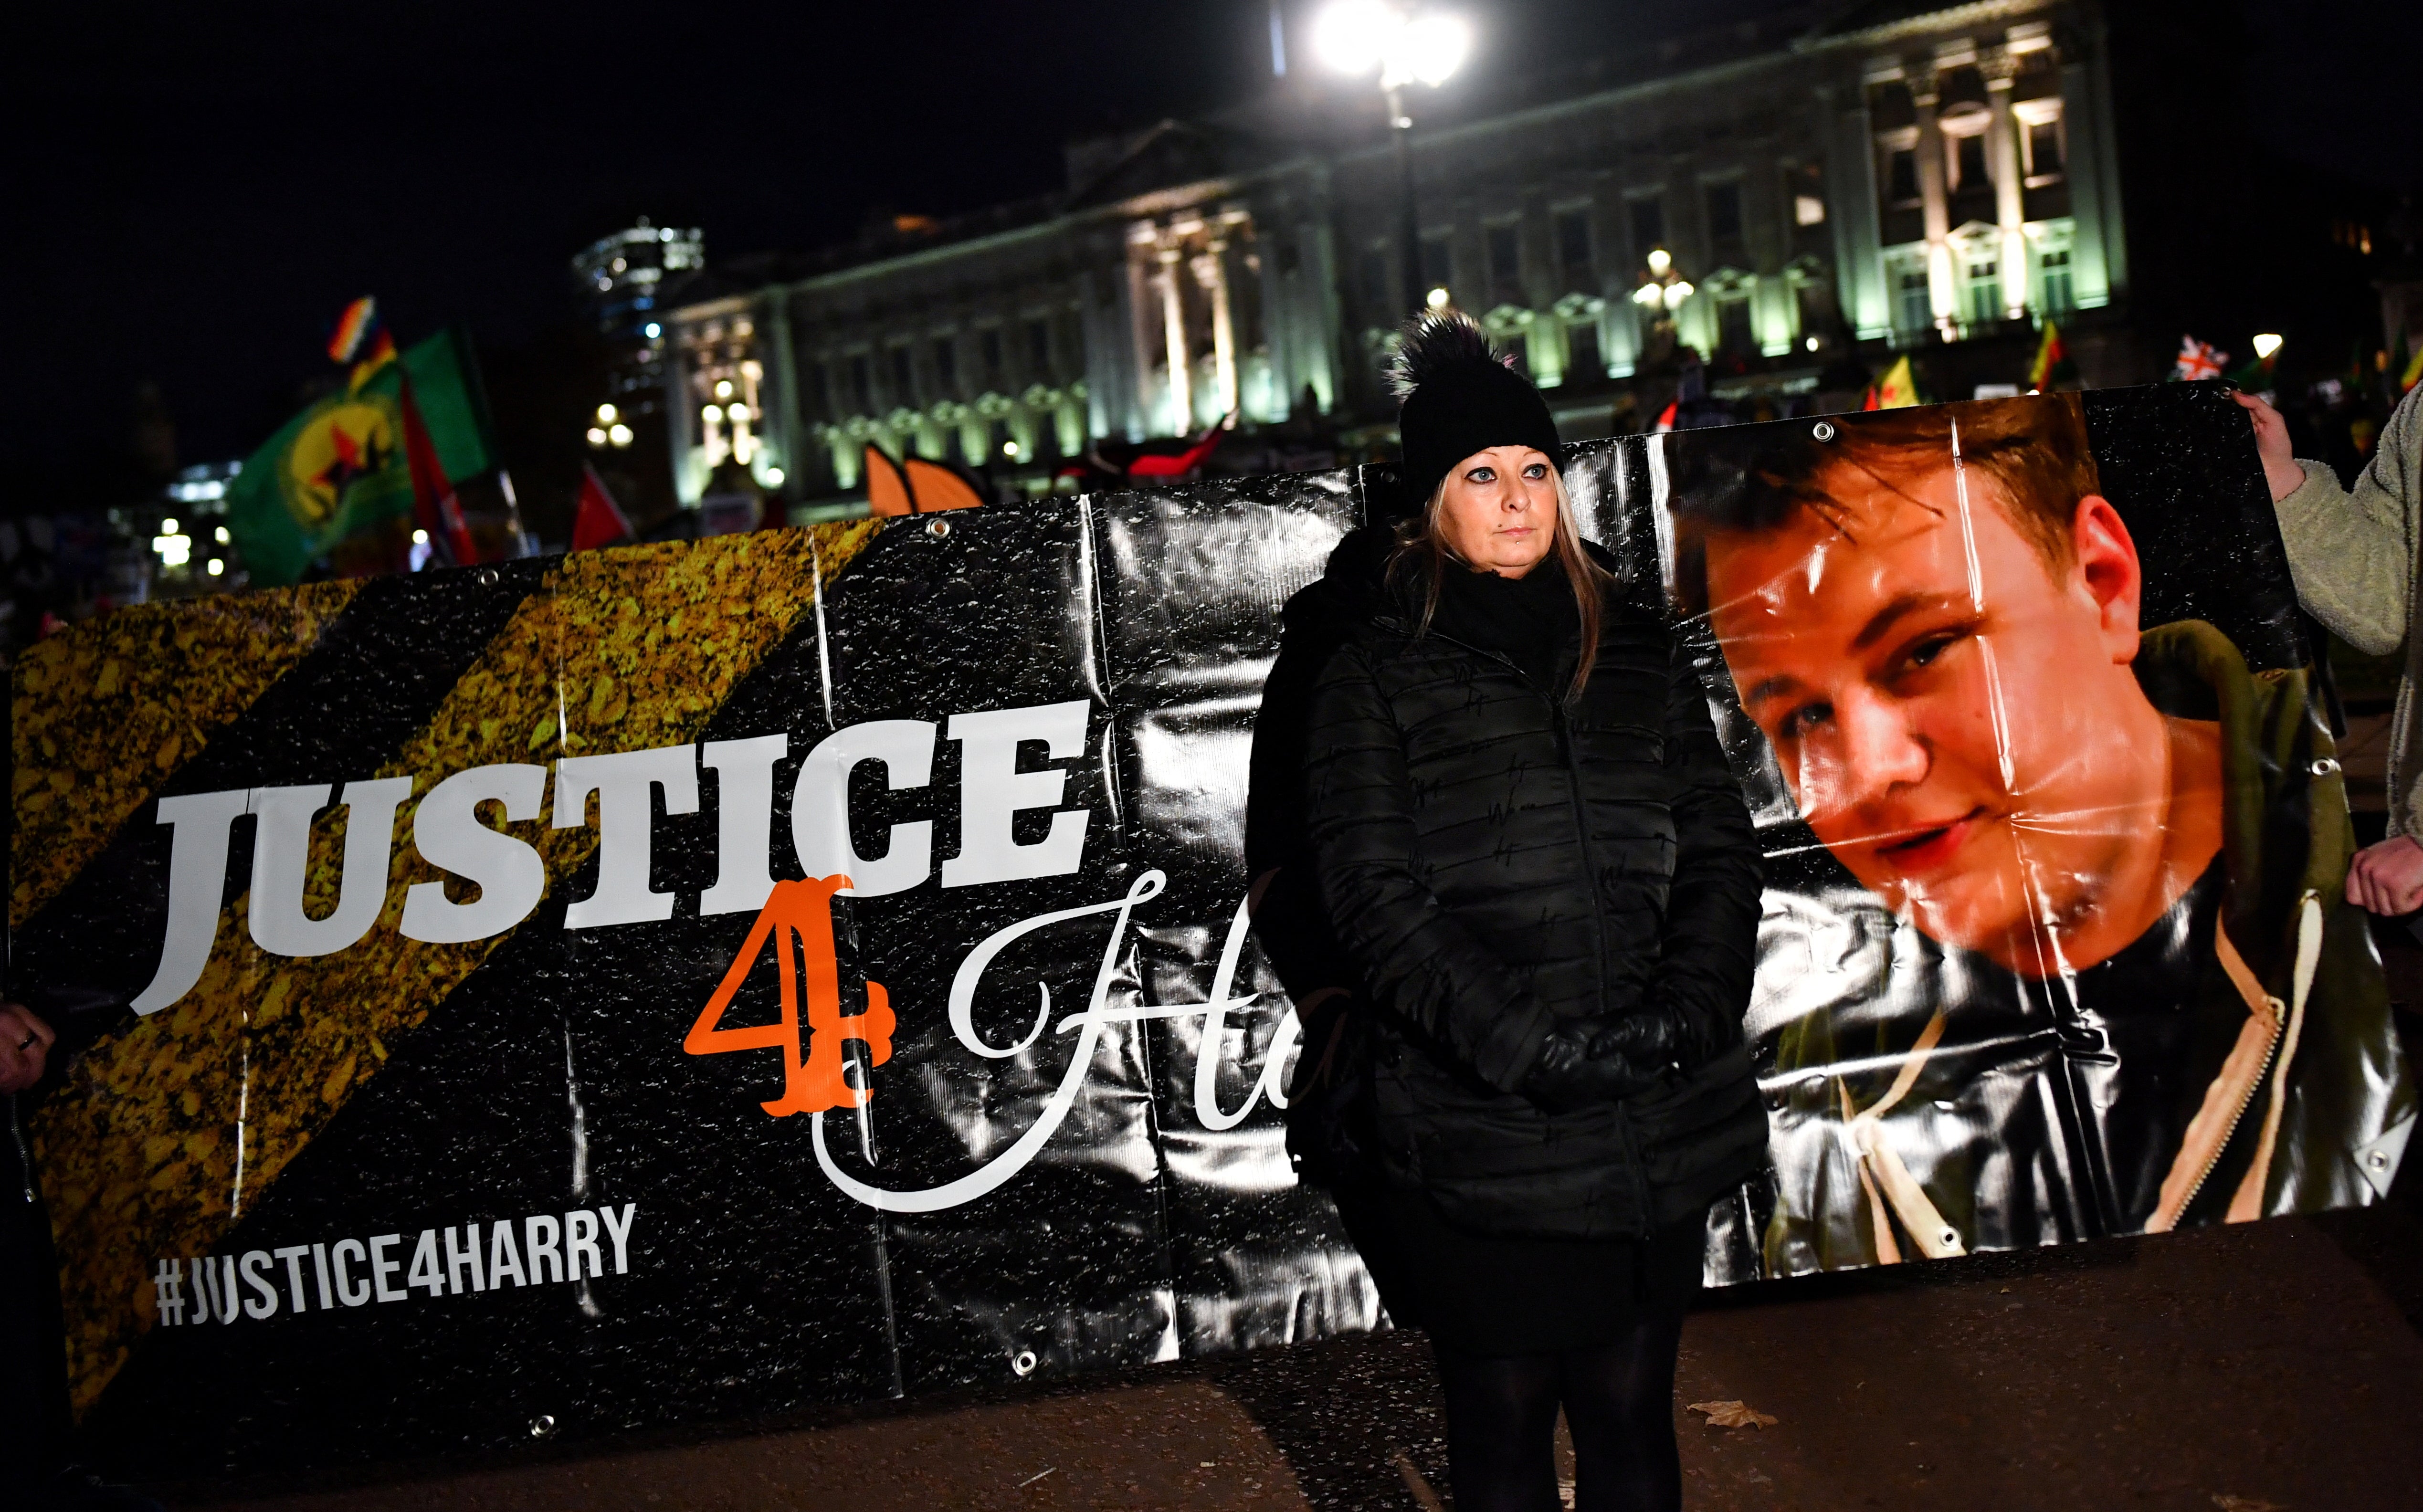 Charlotte Charles, the mother of Harry Dunn, stands outside Buckingham Palace on 3 December 2019, during President Donald Trump’s visit to the UK